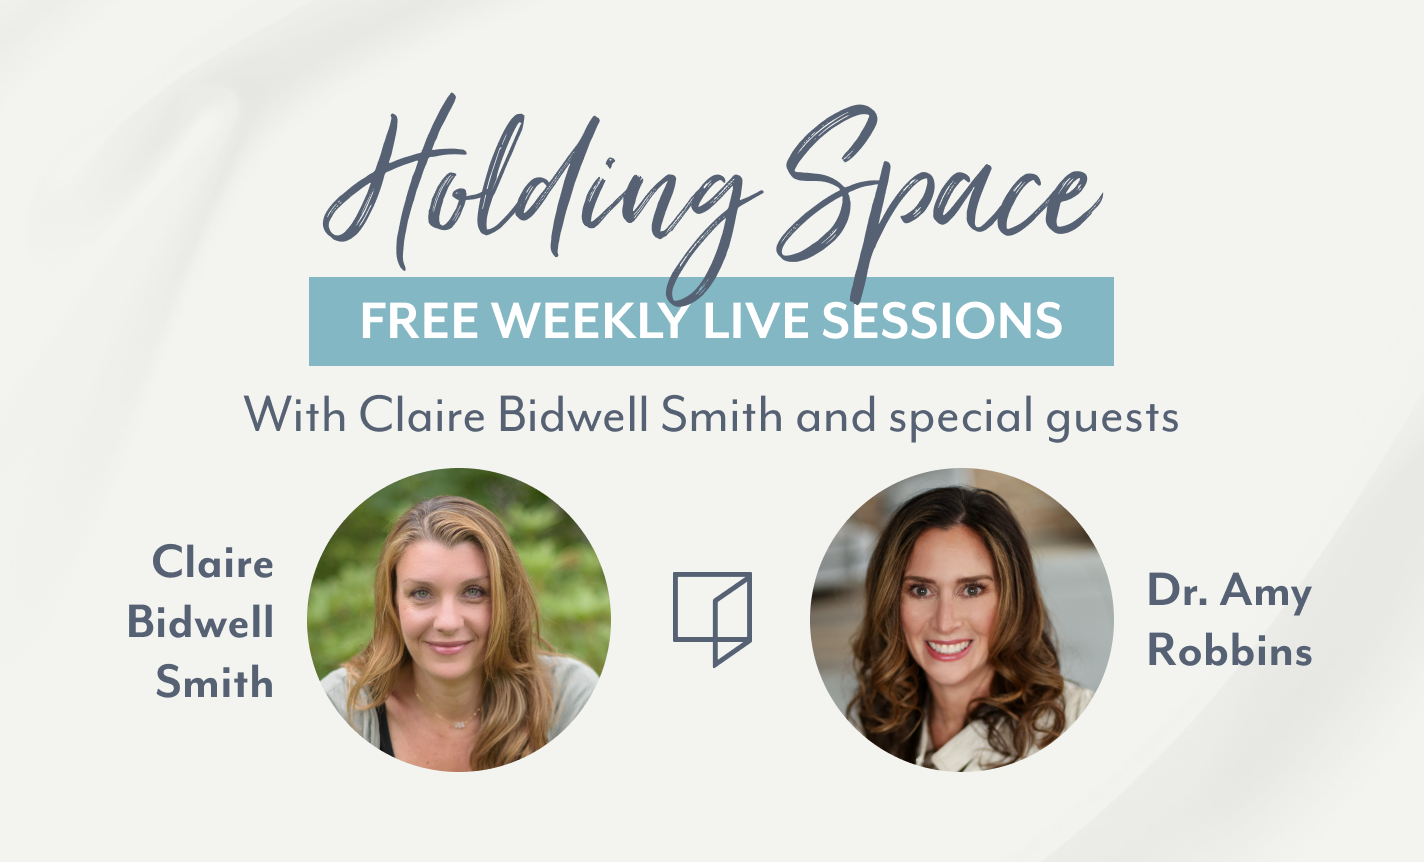 Holding Space: Claire Bidwell Smith & Dr. Amy Robbins